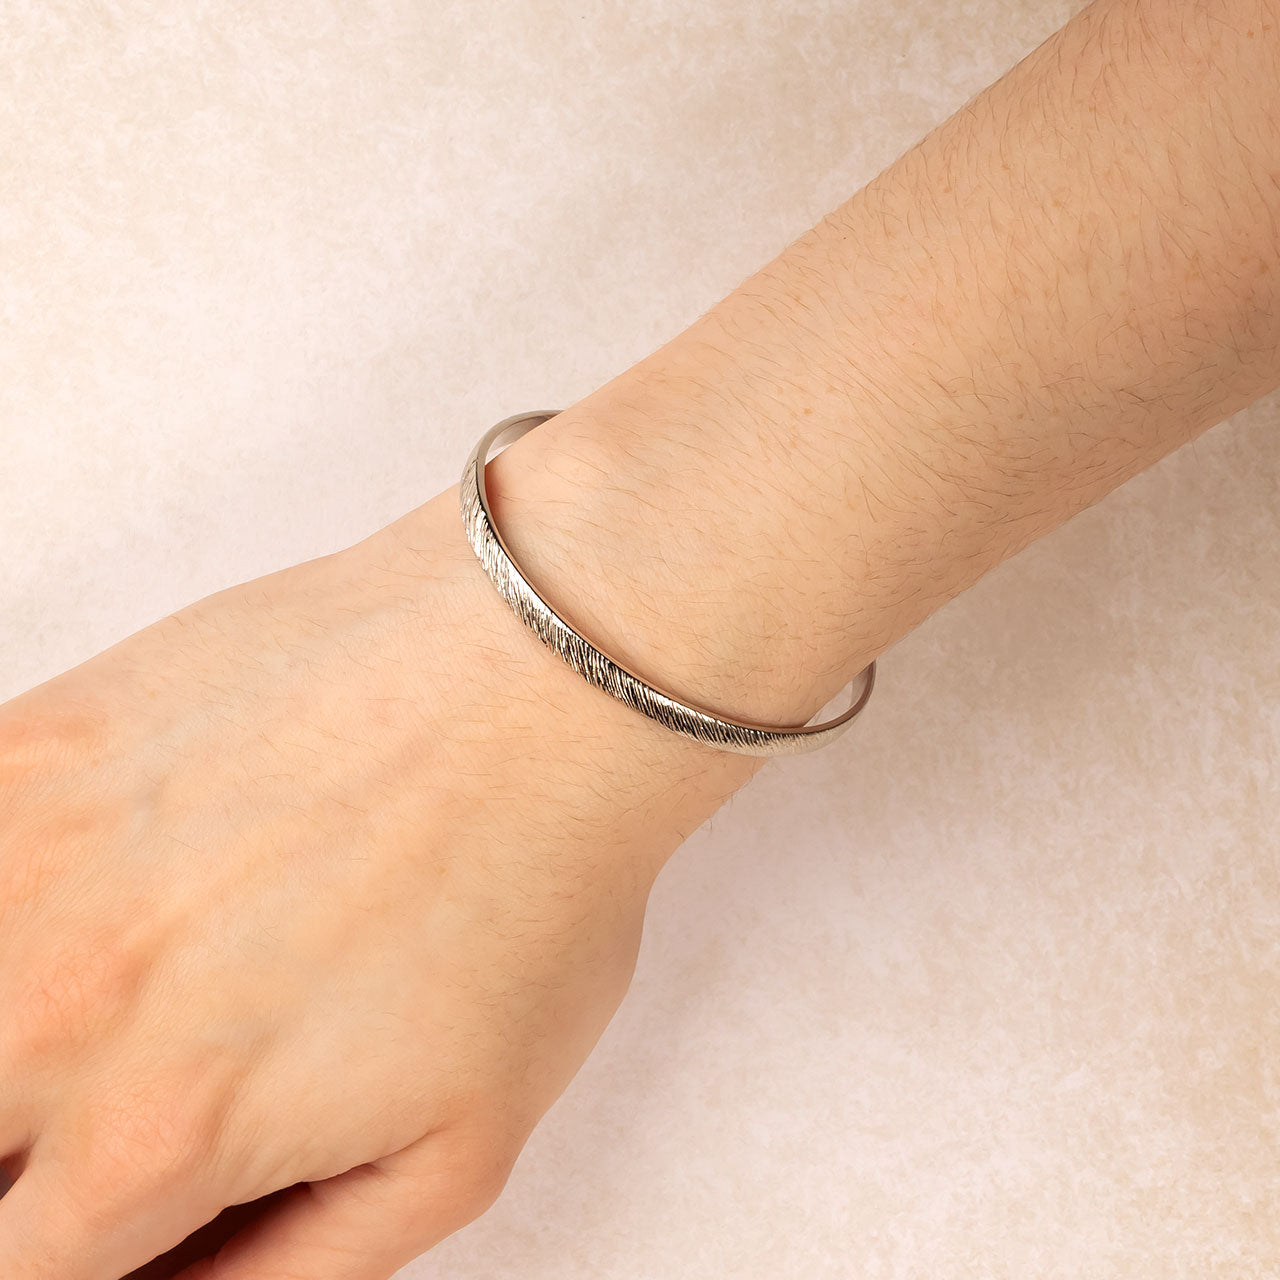 Sterling Silver Diagonal Textured Elements Bangle